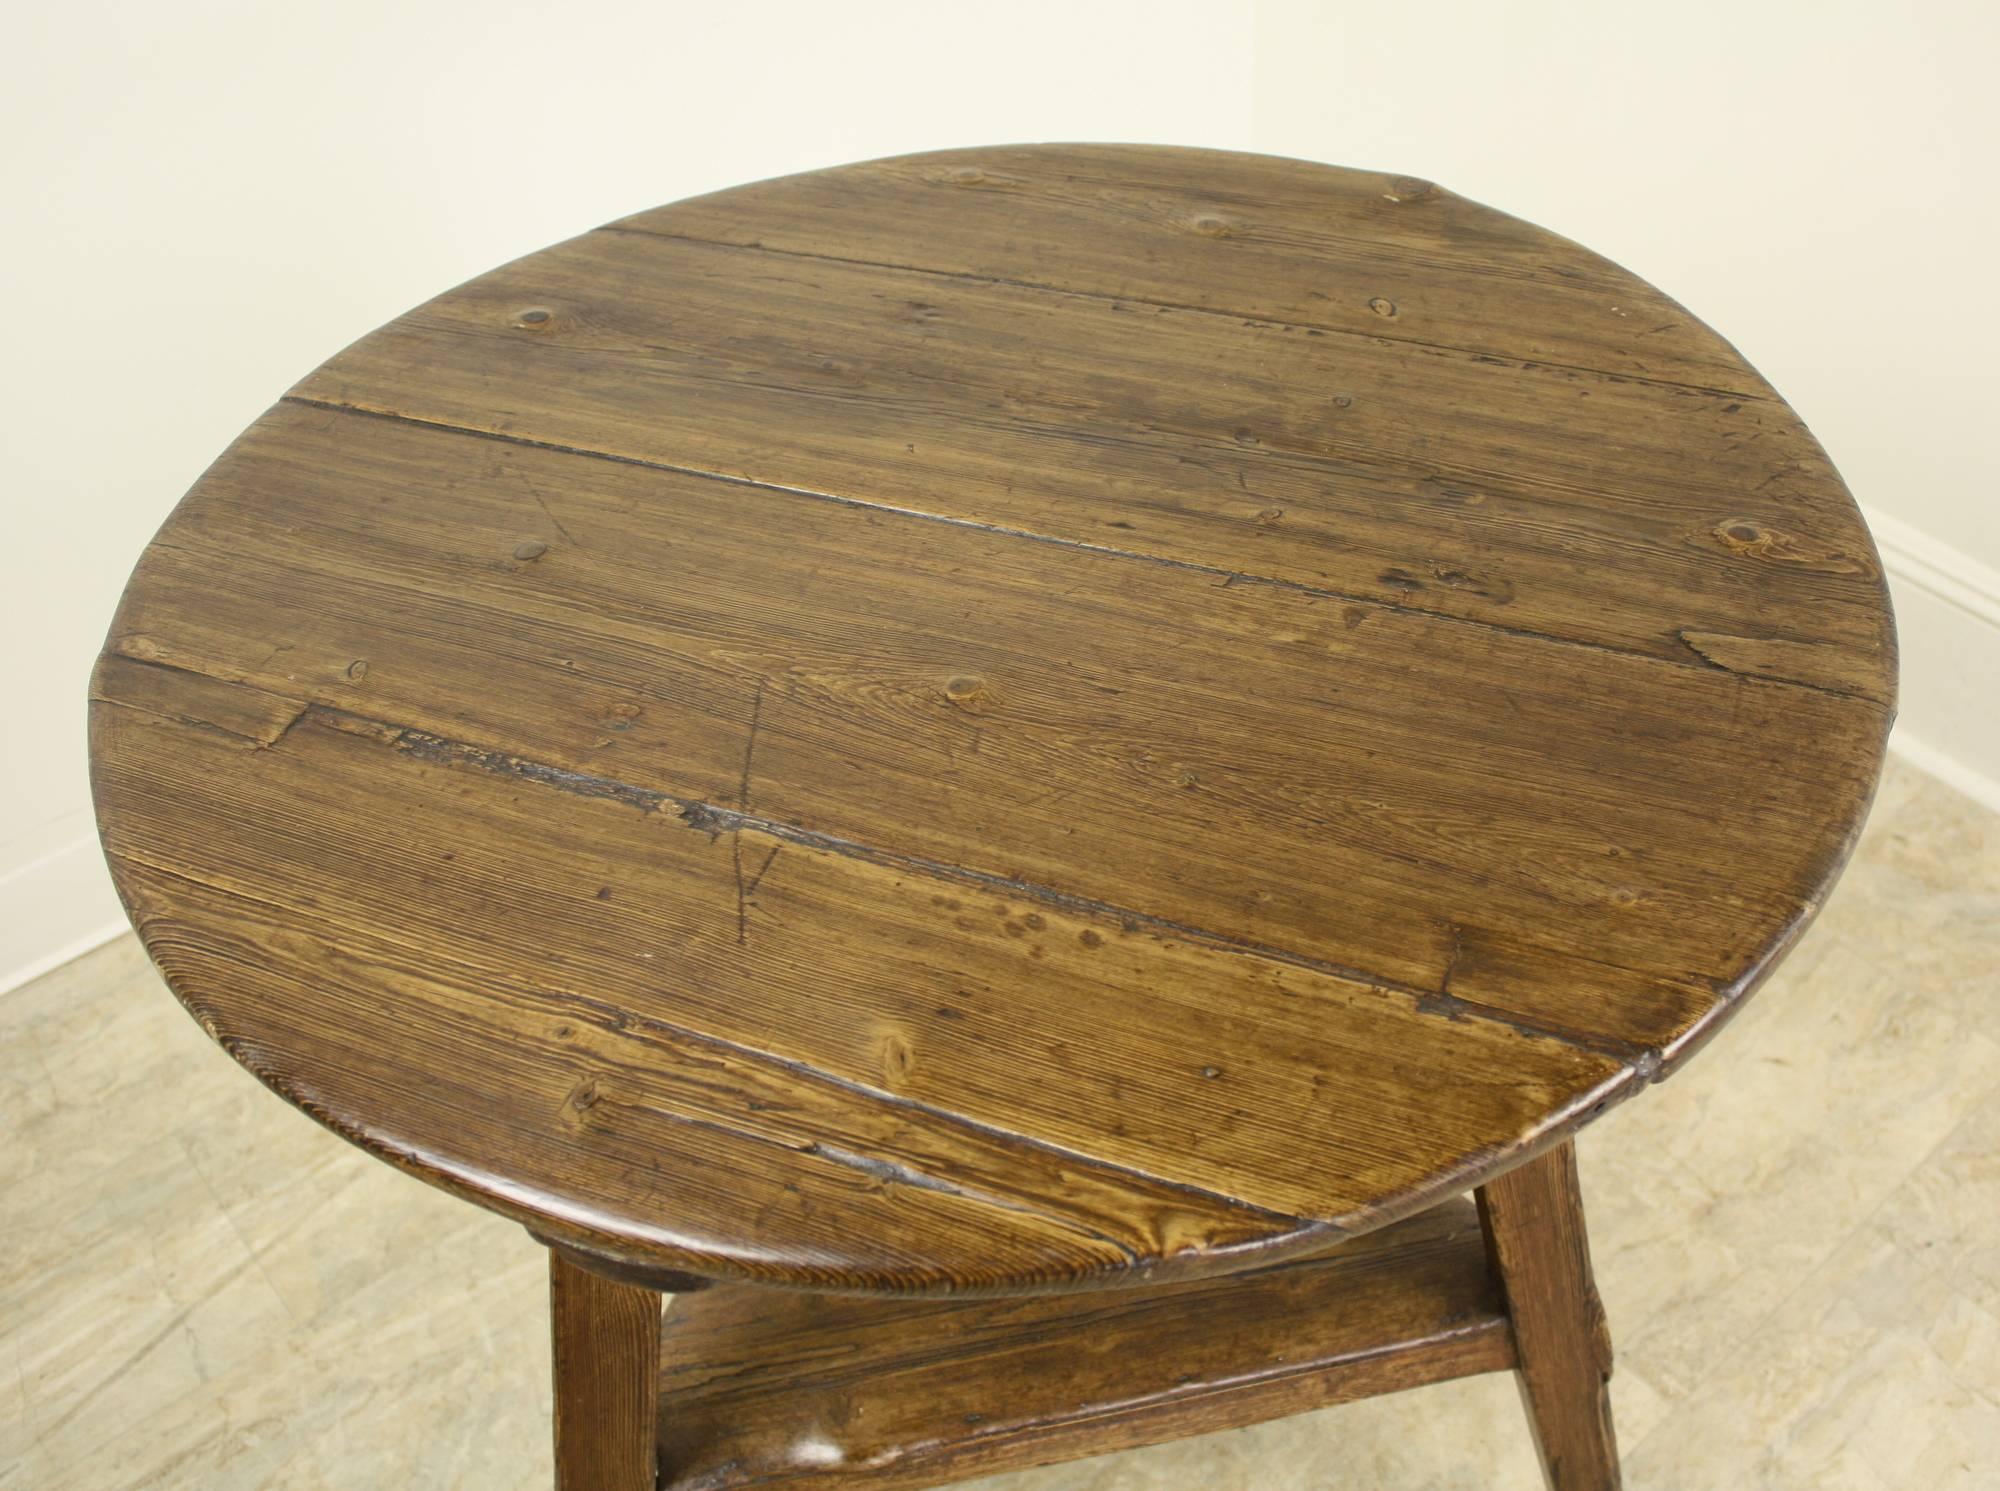 A pine cricket table with exceptional dark rich color, glow and patina.  The use of full grained wood, complete with natural knotholes and textures makes this a fine example of handmade country antique furniture.  Typical three-legged table, with